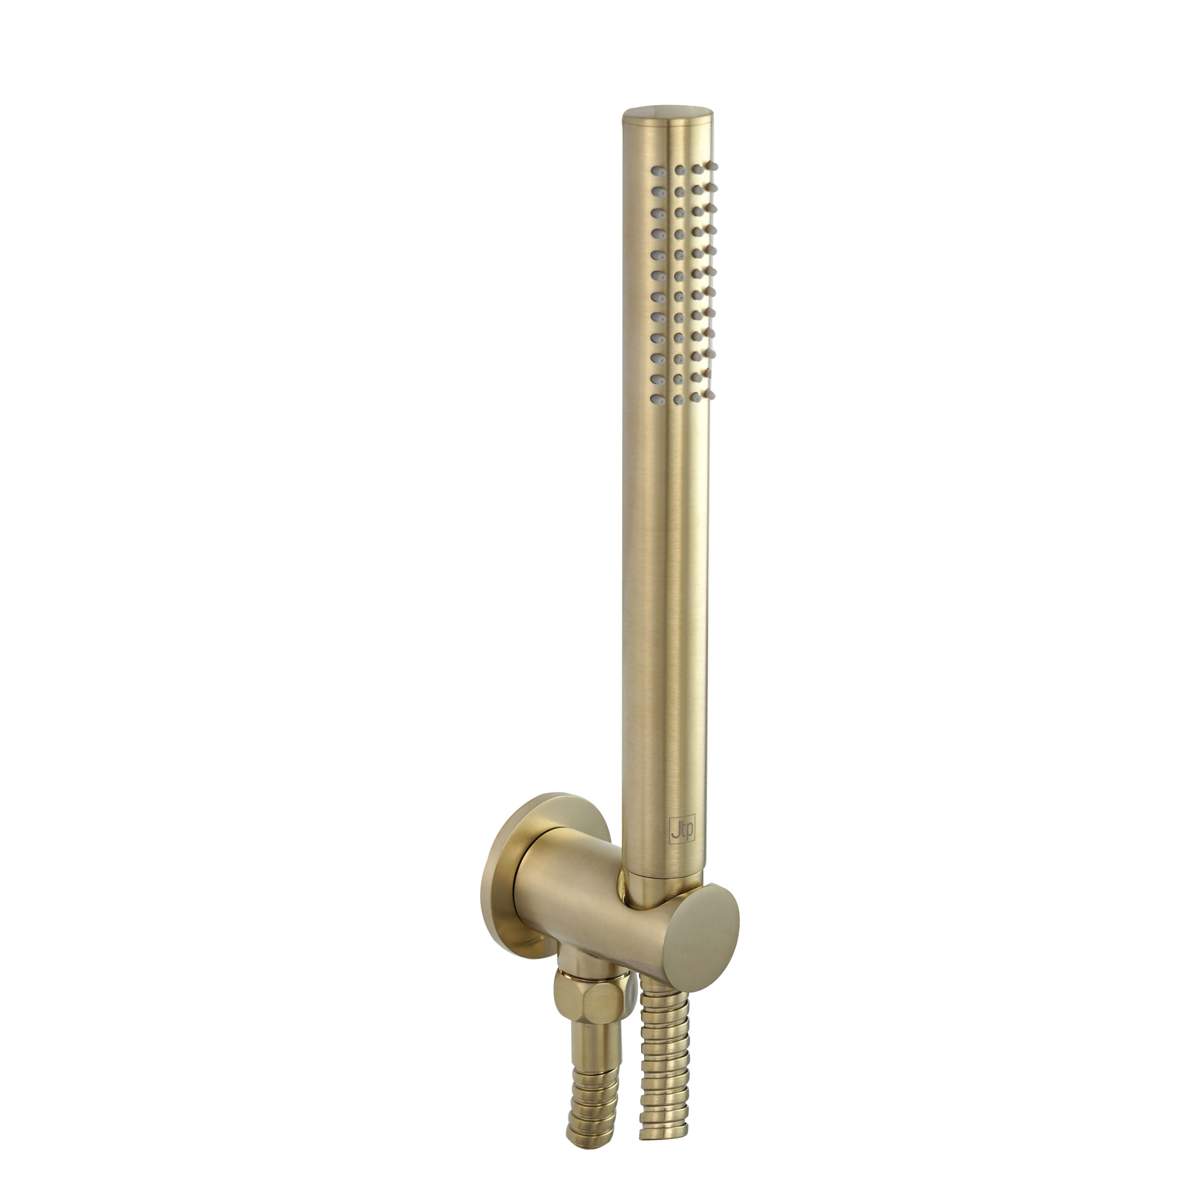 JTP Vos Brushed Brass Round Water Outlet with Holder, Metal Hose and Slim Hand Shower